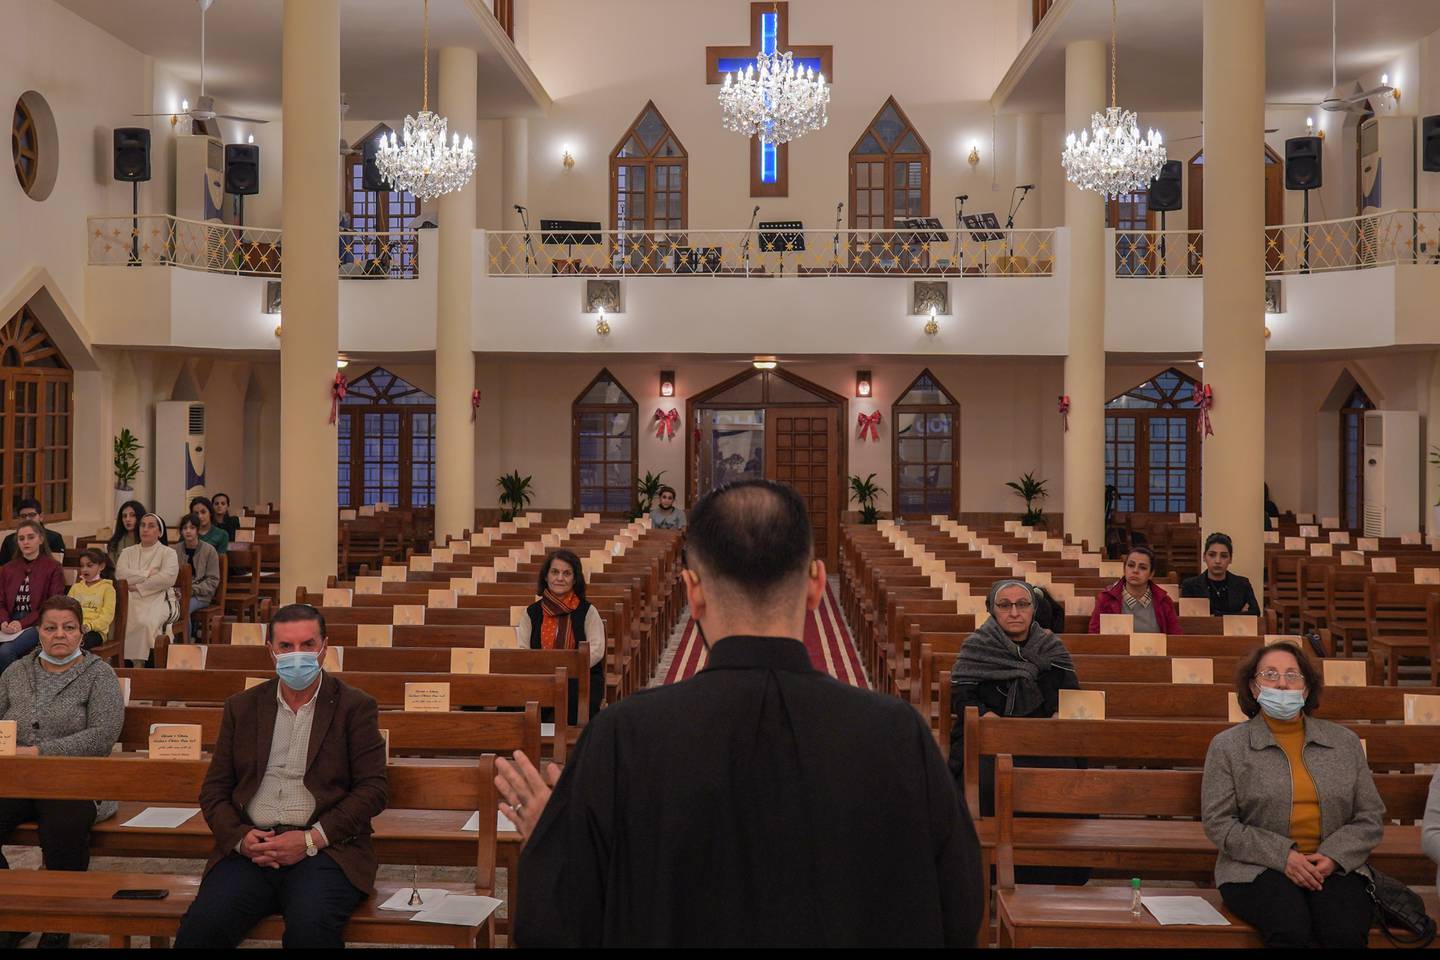 A service at the Virgin Mary's Chaldean Catholic Church in central Baghdad.